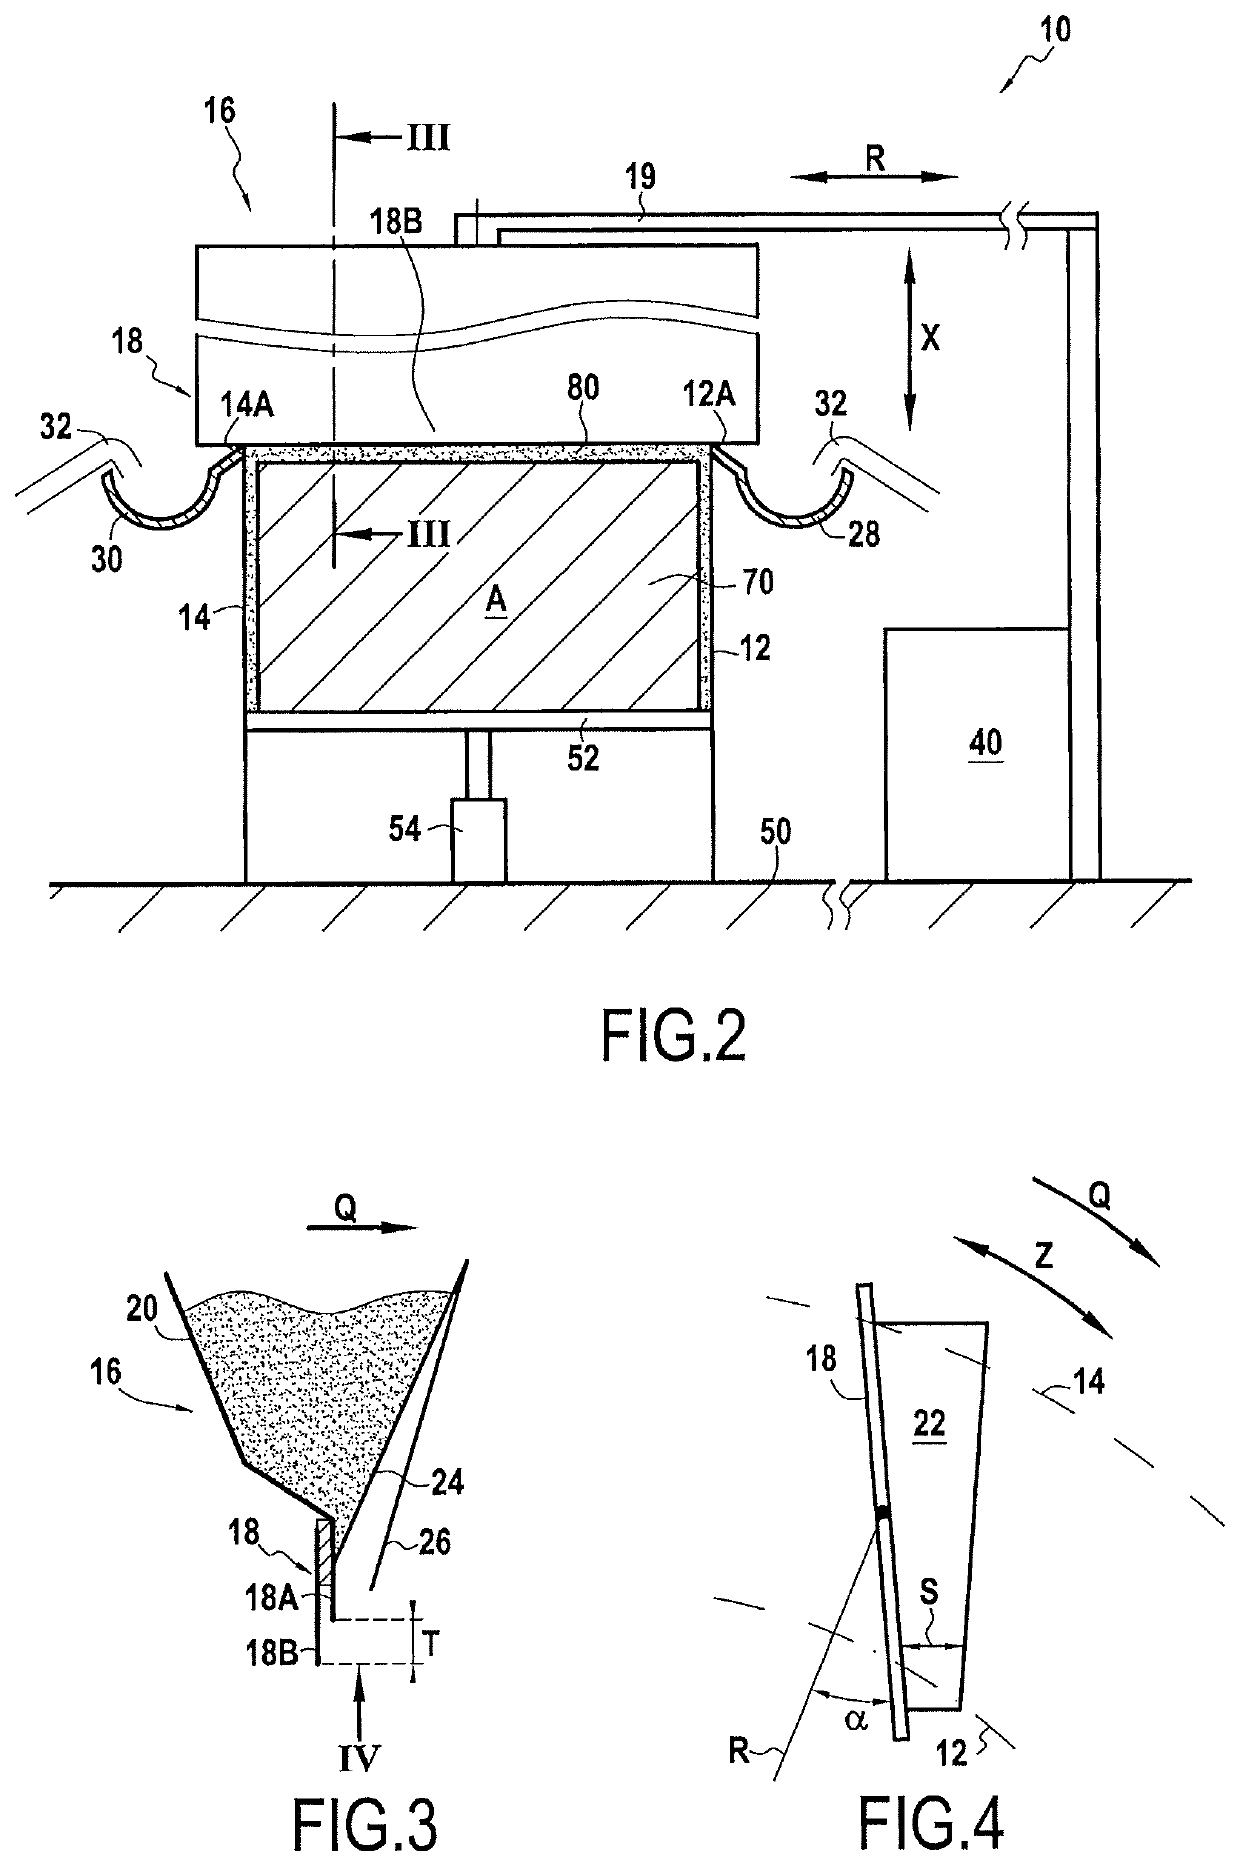 Device for fabricating annular pieces by selectively melting powder, the device including a powder wiper